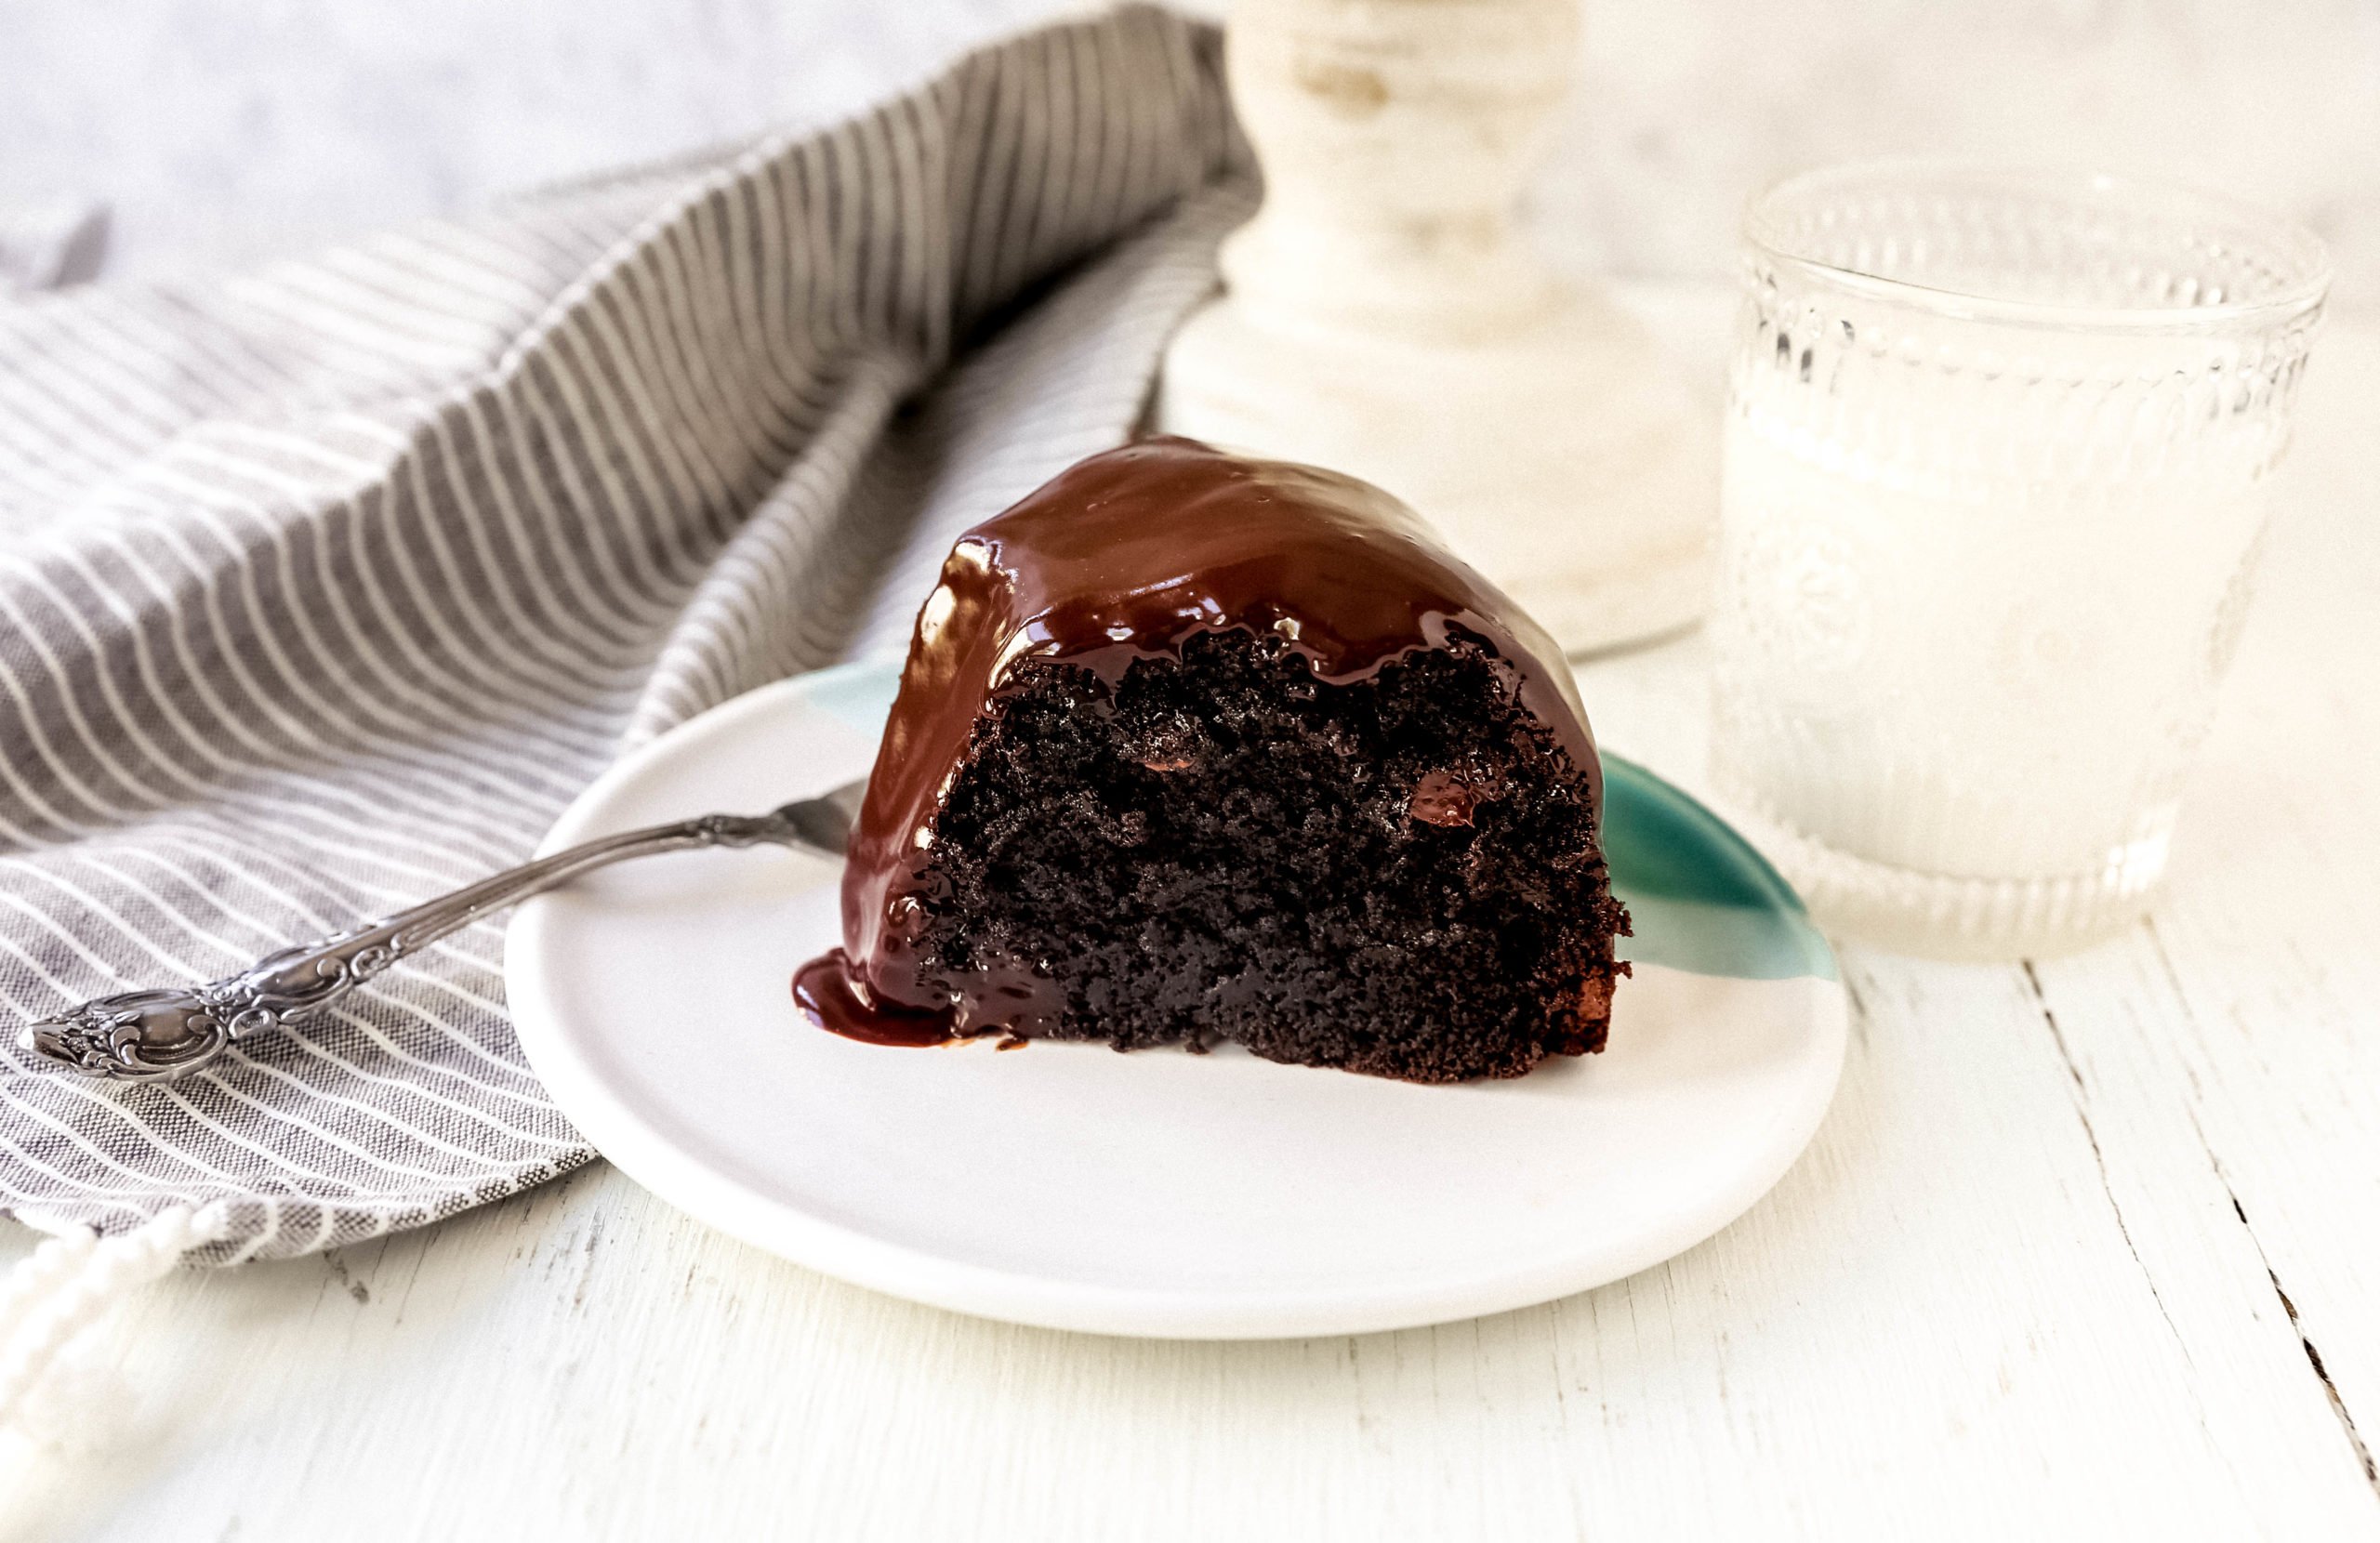 The Best Chocolate Bundt Cake Moist, decadent, rich chocolate bundt cake with a silky chocolate glaze. How to make the perfect chocolate bundt cake recipe! #chocolate #bundtcake #chocolatebundtcake #chocolatecake #cake